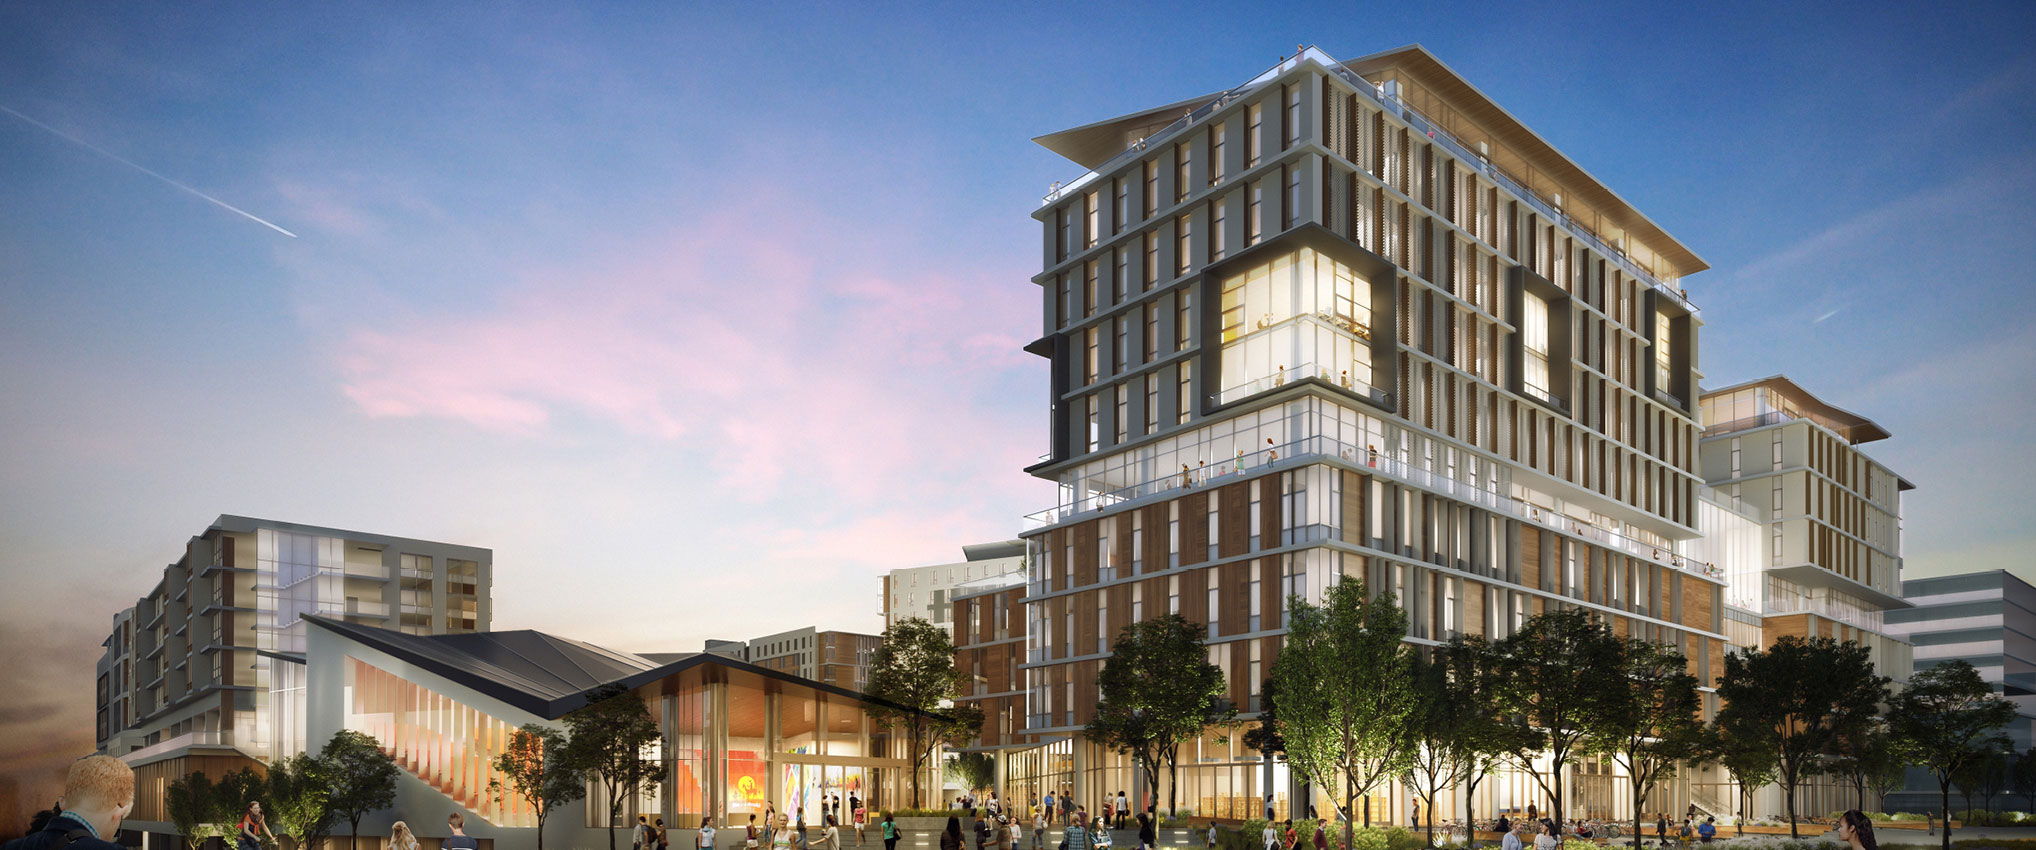 Team Led by HKS Architects Tapped for UC San Diego Mixed-Use Campus Expansion